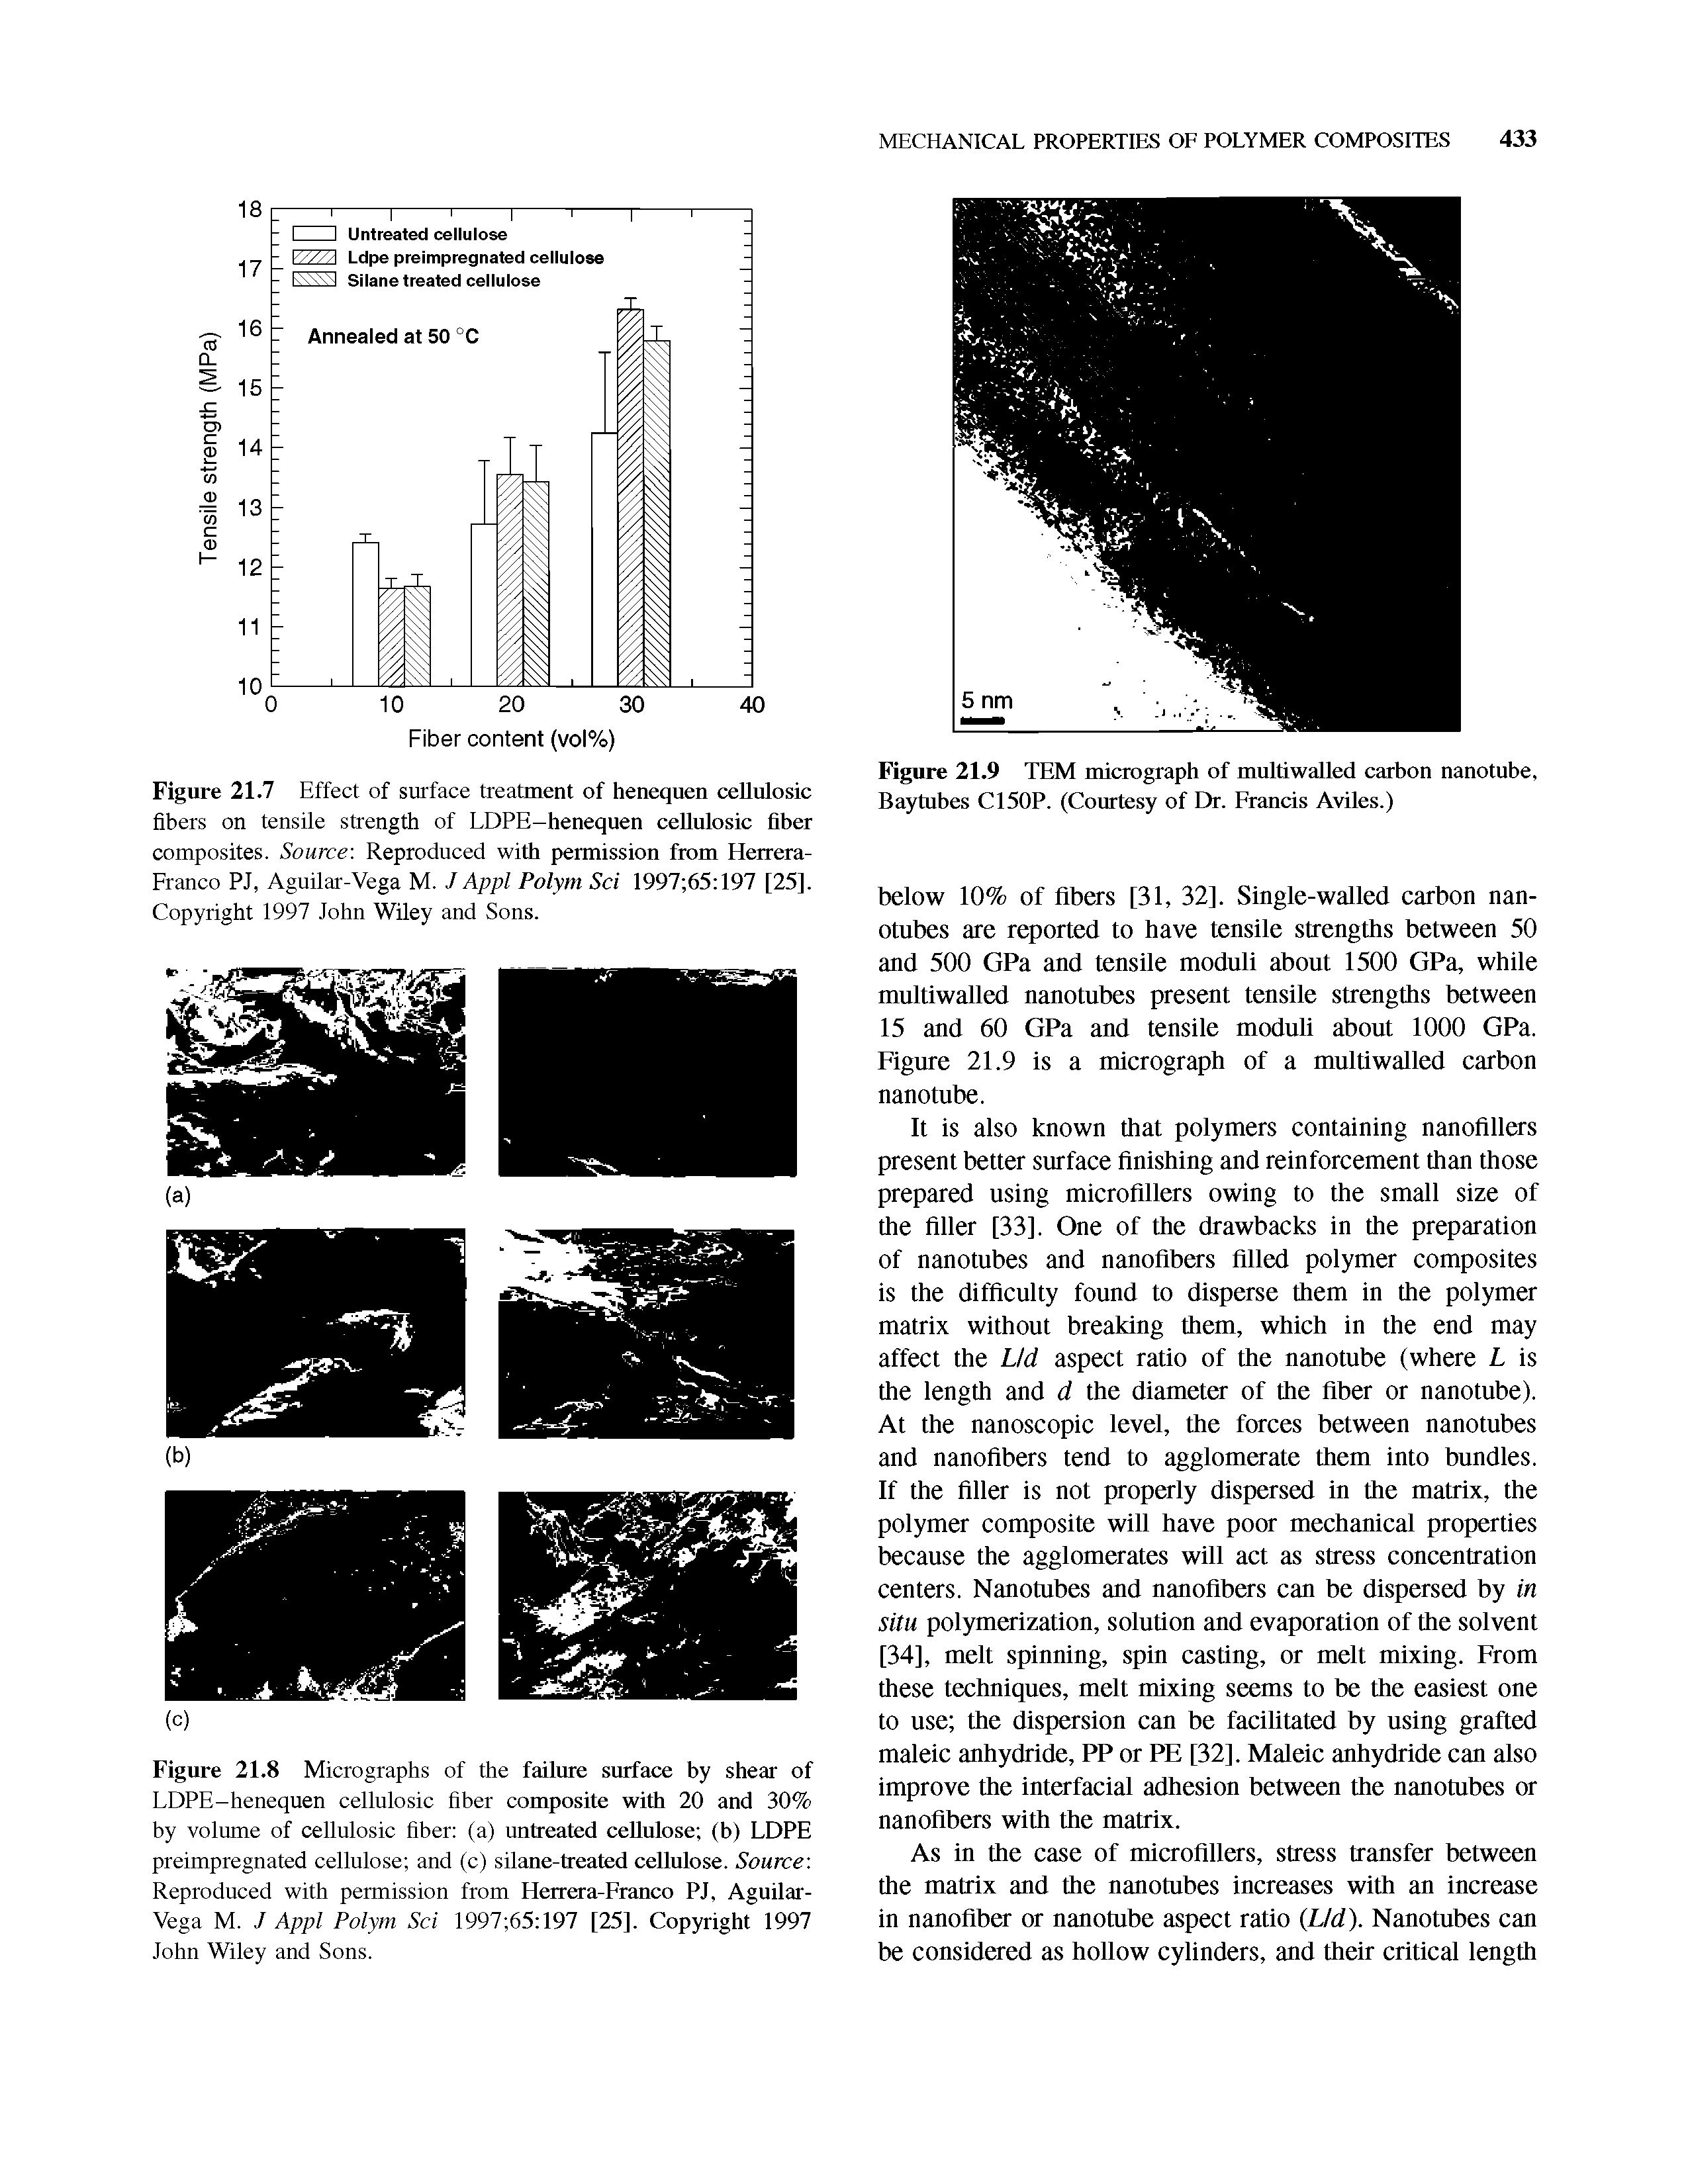 Figure 21.7 Effect of surface treatment of henequen ceUulosic fibers on tensile strength of LDPE-henequen ceUulosic fiber composites. Source Reproduced with permission from Herrera-Franco PJ, Aguilar-Vega M. J Appl Polym Sci 1997 65 197 [25]. Copyright 1997 John Wiley and Sons.